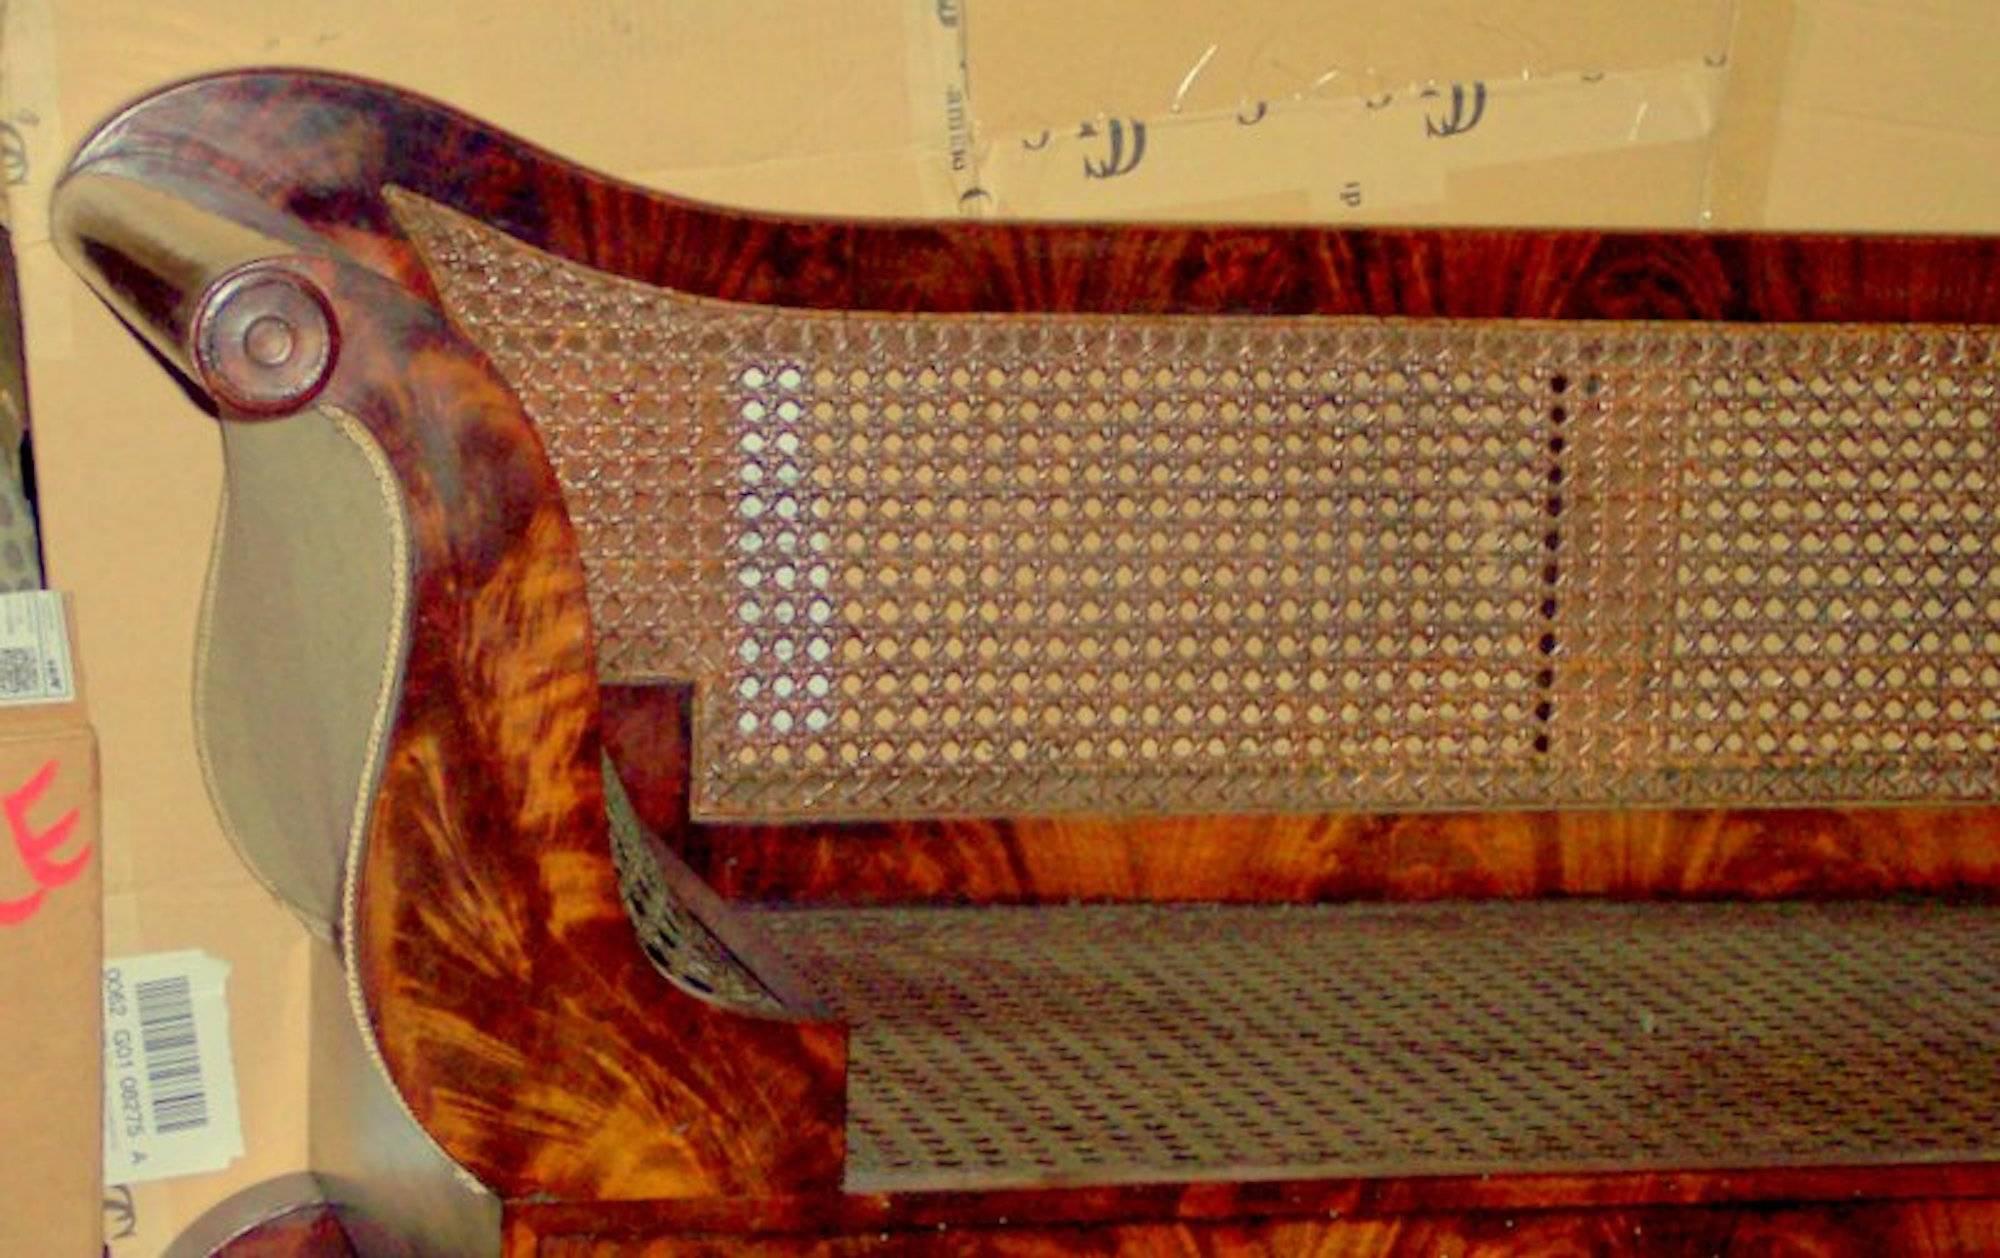 Rare and important antique American flame mahogany and cane Empire period recamier or chaise longue, acquired from and made for the Charleston market.

This is an extremely rare and fine antique American flame mahogany Empire period chaise longue